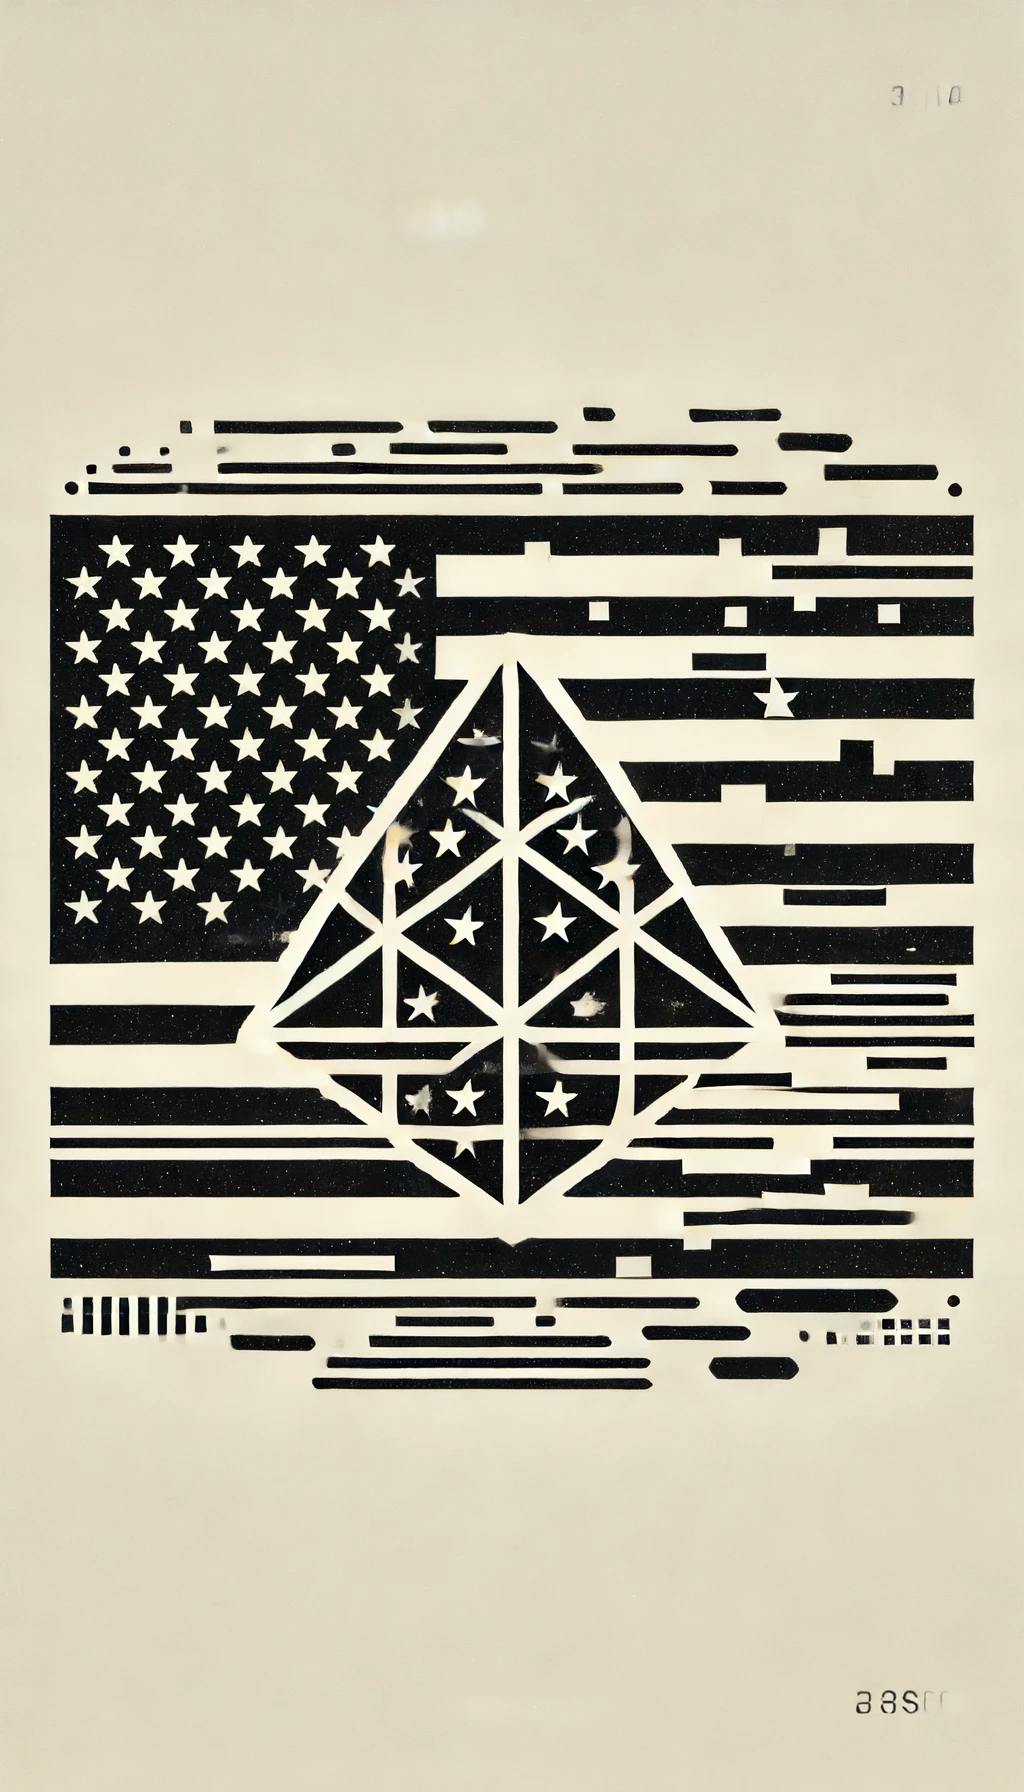 DALL·E 2024-06-18 08.50.49 - Create a very simple and elegant glitch art style image with a USA patriotic theme in black and white, featuring a clear 3D tetrahedron. Focus on the .webp